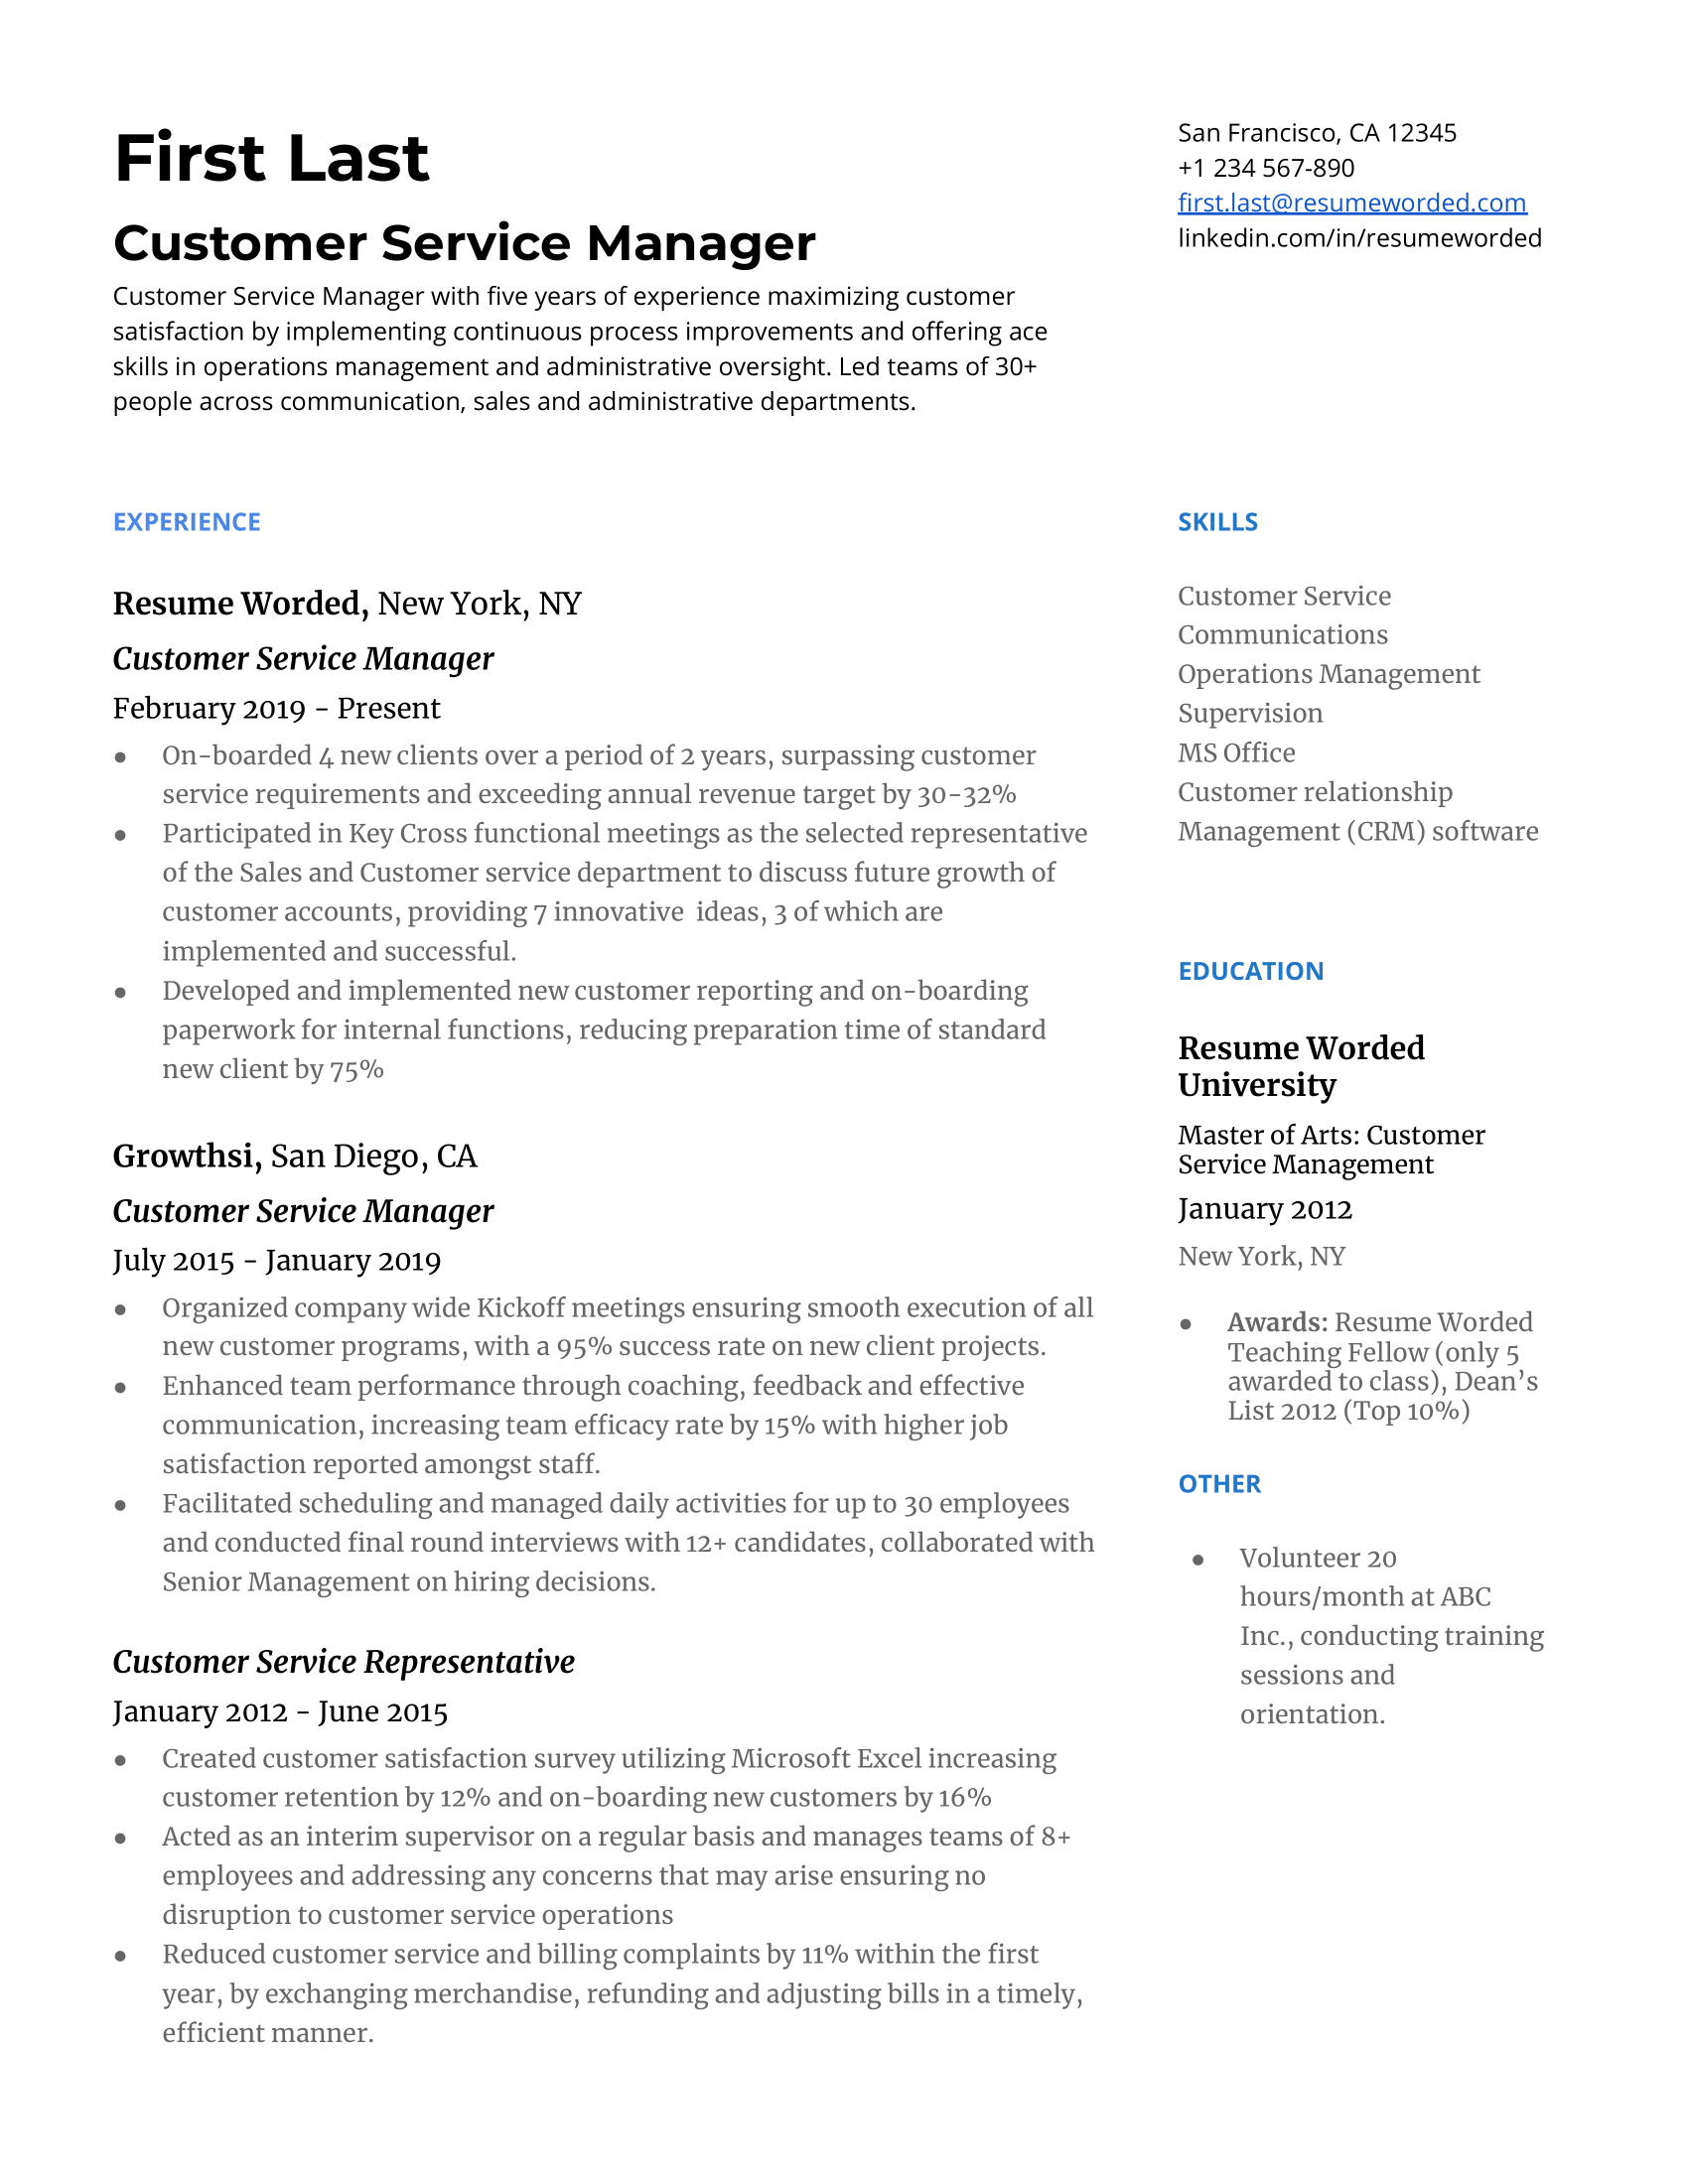 A well-crafted CV for a Customer Service Manager position.